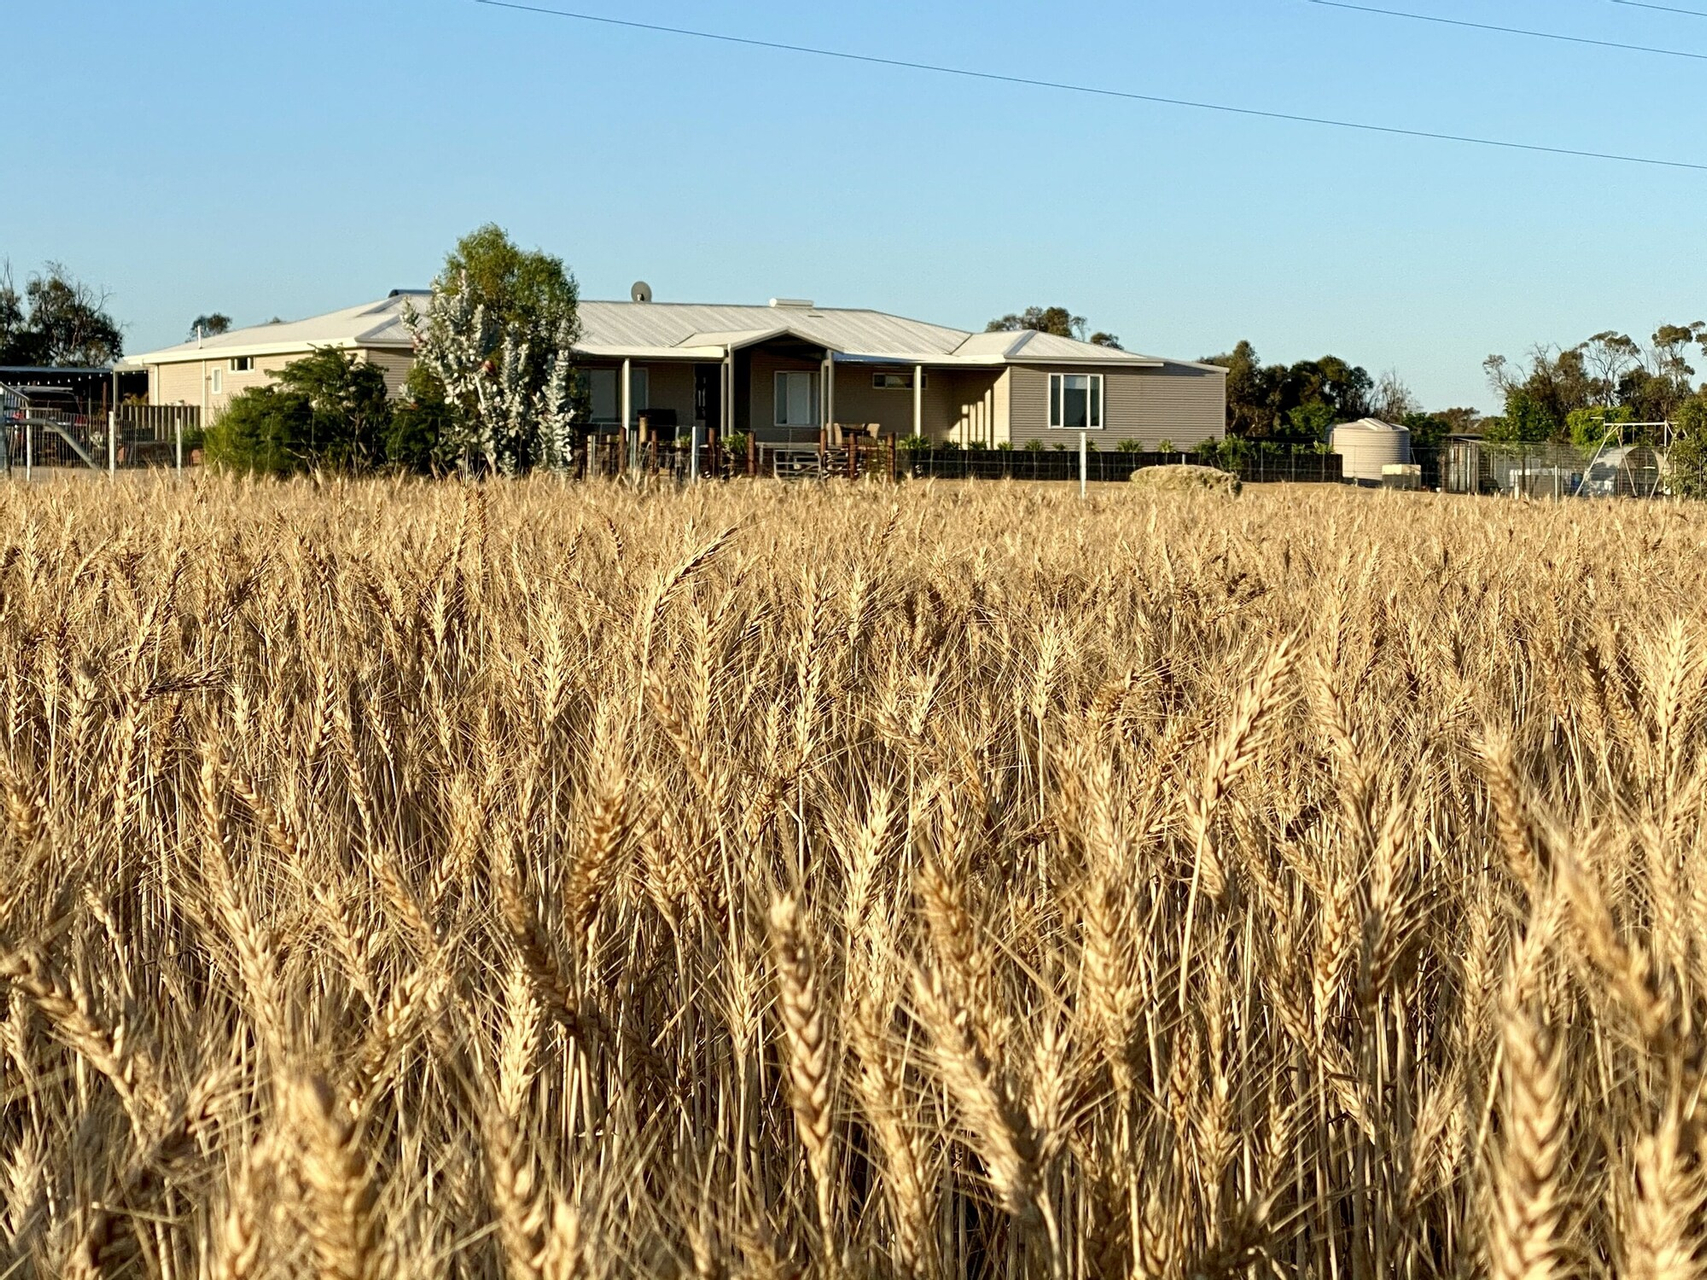 Exterior & Views 2, The Mains Guest House 2 Bedroom Farm Stay, Corrigin